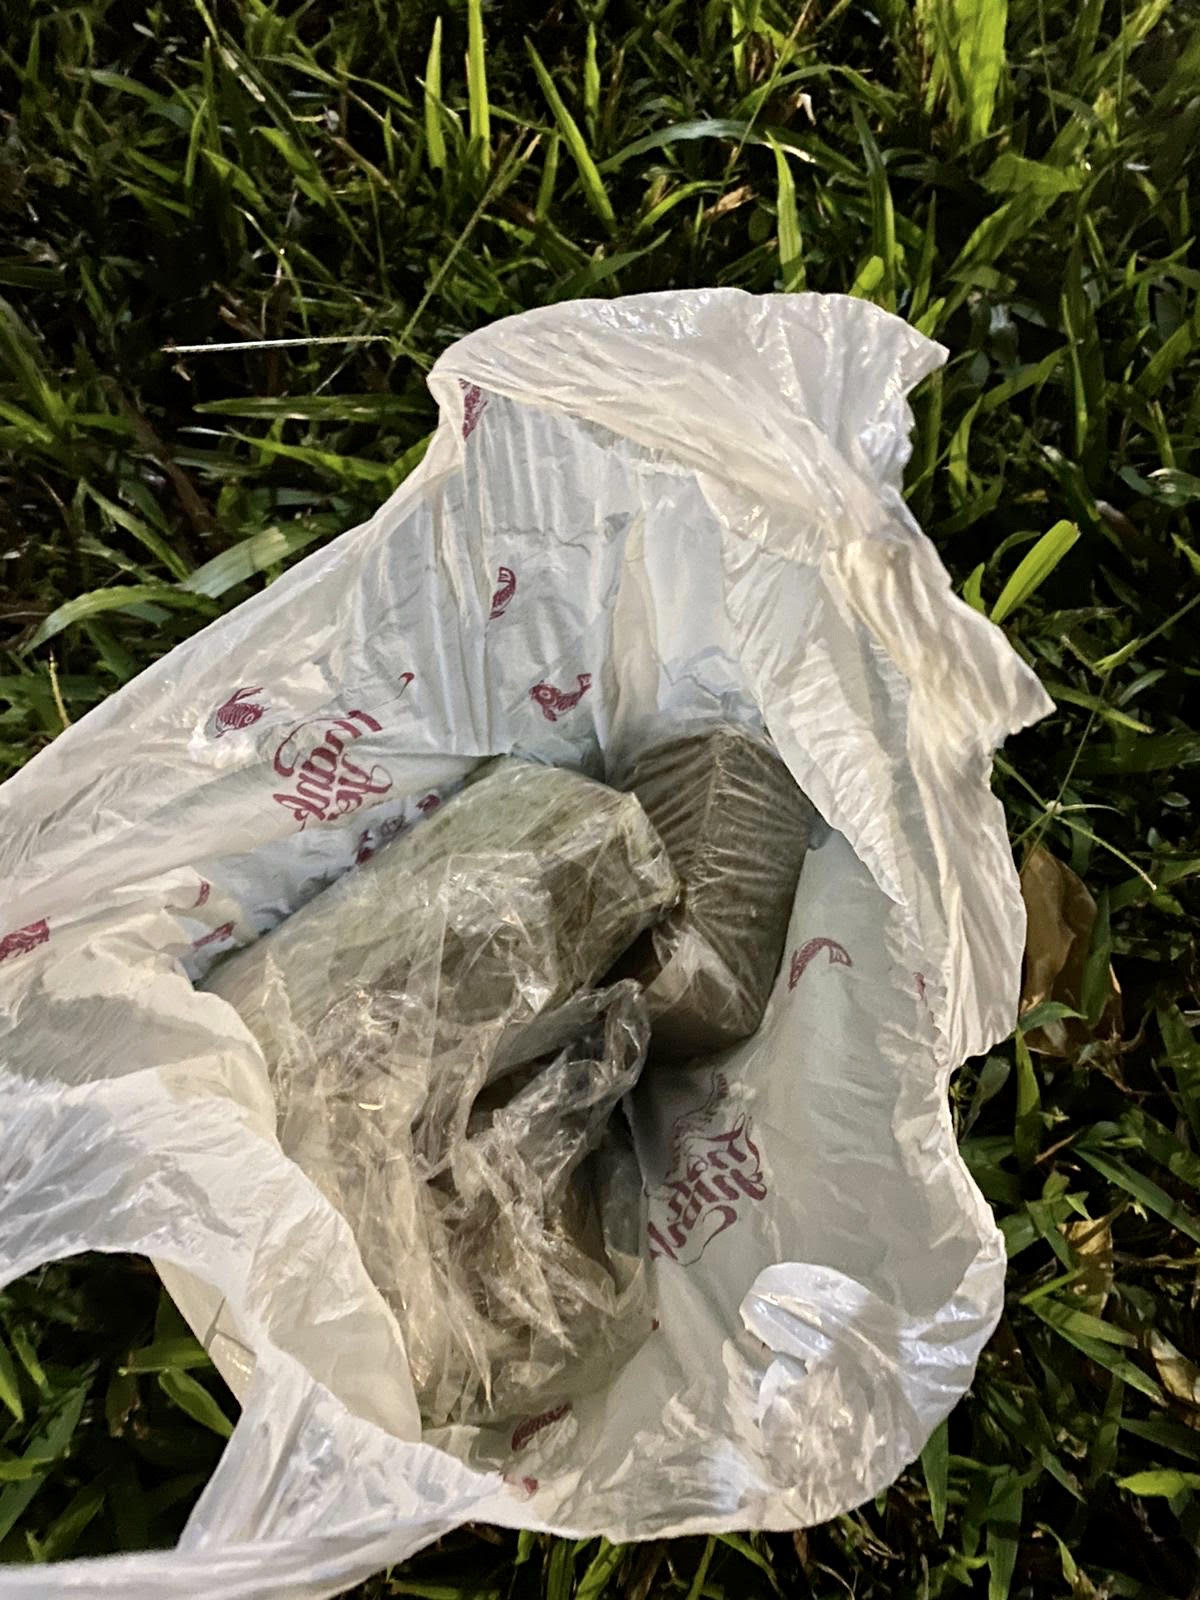 Photo 2 (CNB) – A bag containing about 965g of cannabis recovered from the ground floor of a block in the vicinity of Bukit Panjang Ring Road.